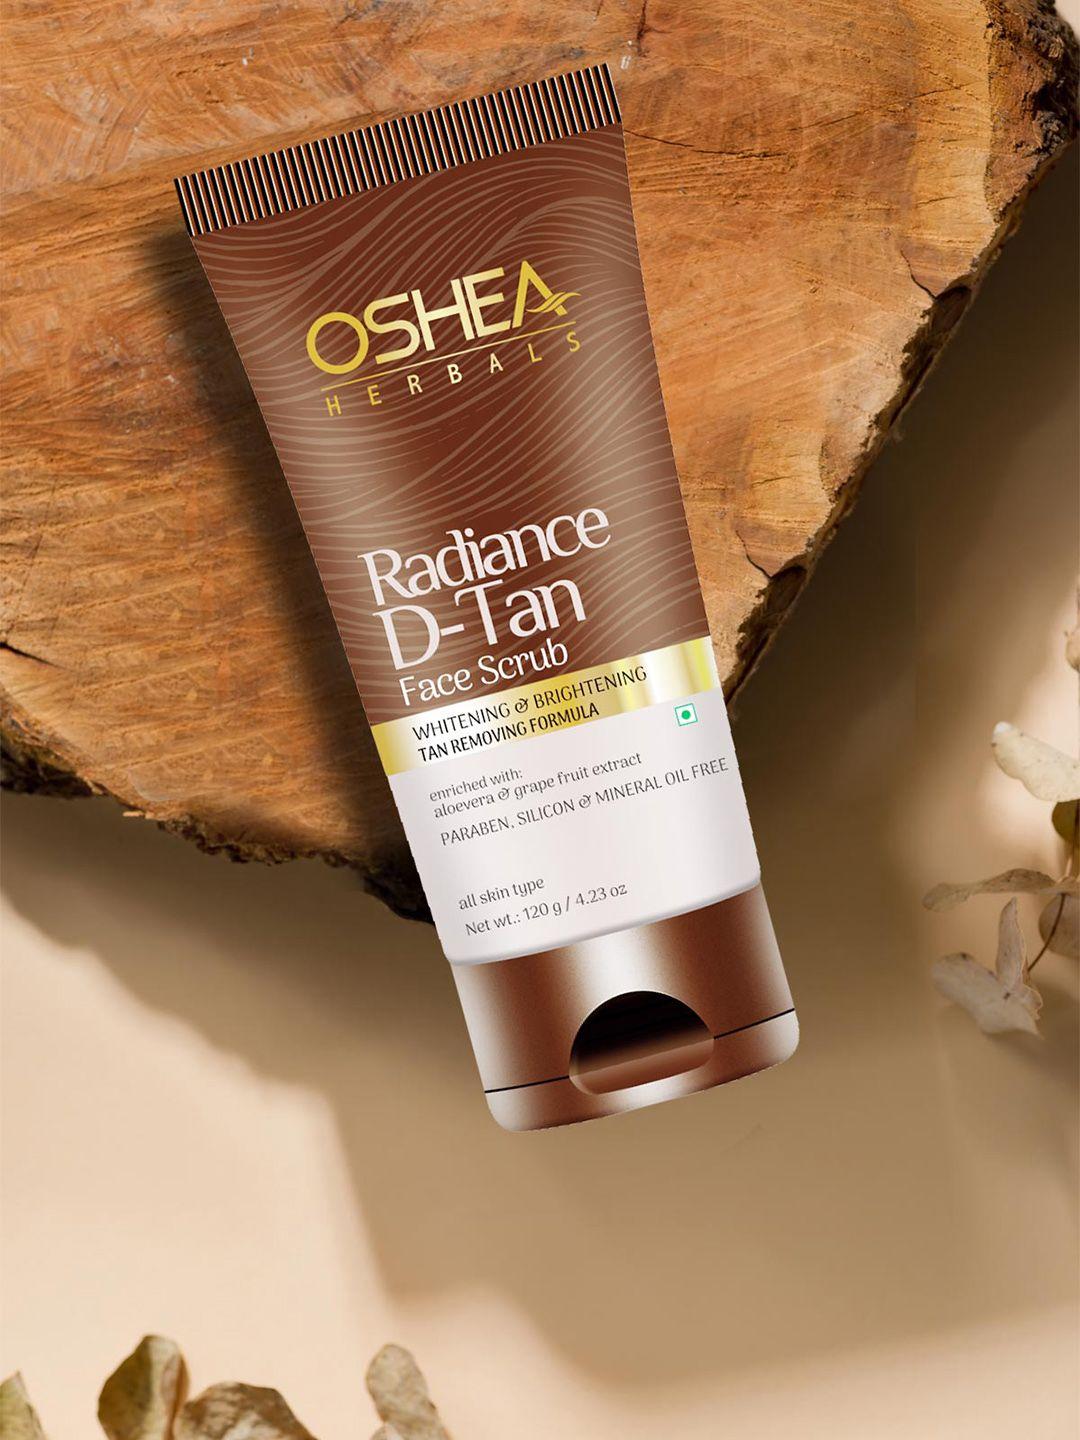 oshea herbals pack of 2 herbal radiance tan removal face scrub with aloevera & grapefruit